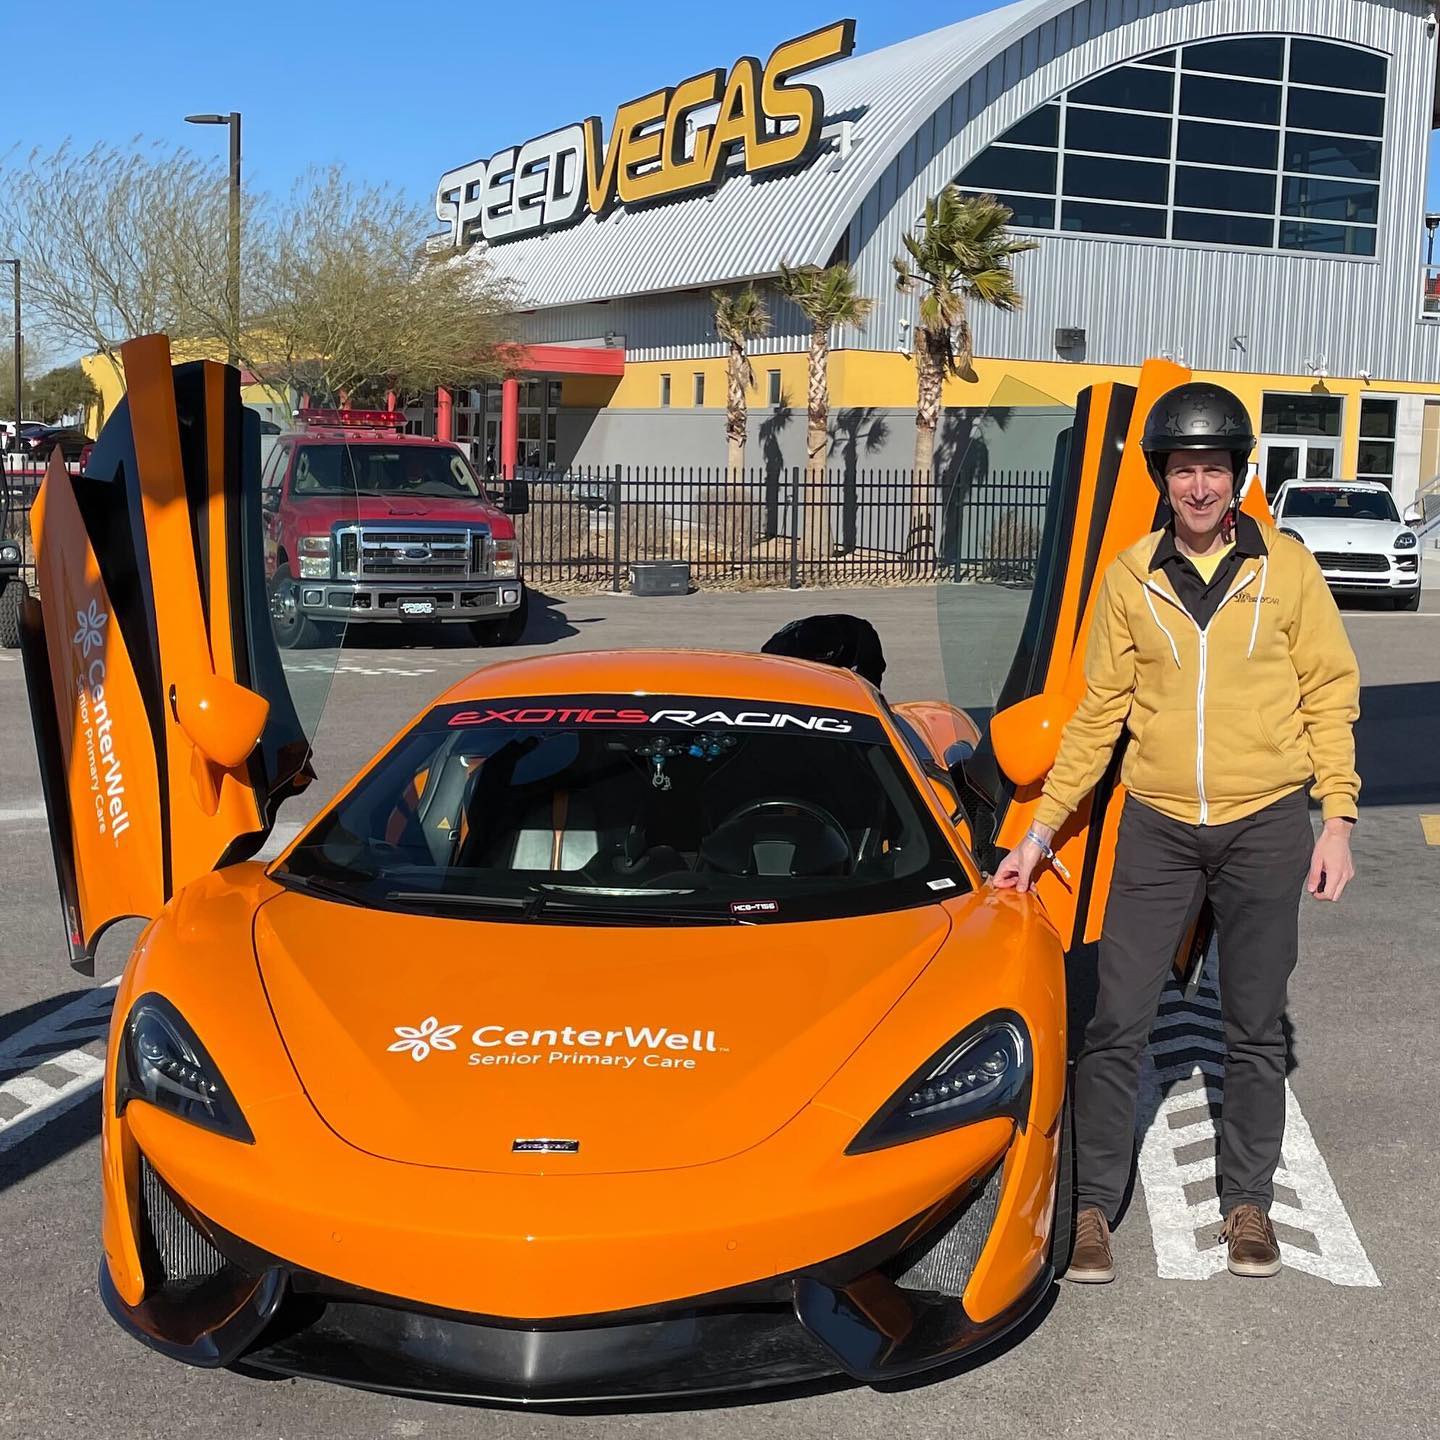 Yes I picked the orange one. Yes it was fast. Yes it was extremely fun. #maclaren570s #exoticsracing #speedvegas #teambuilding